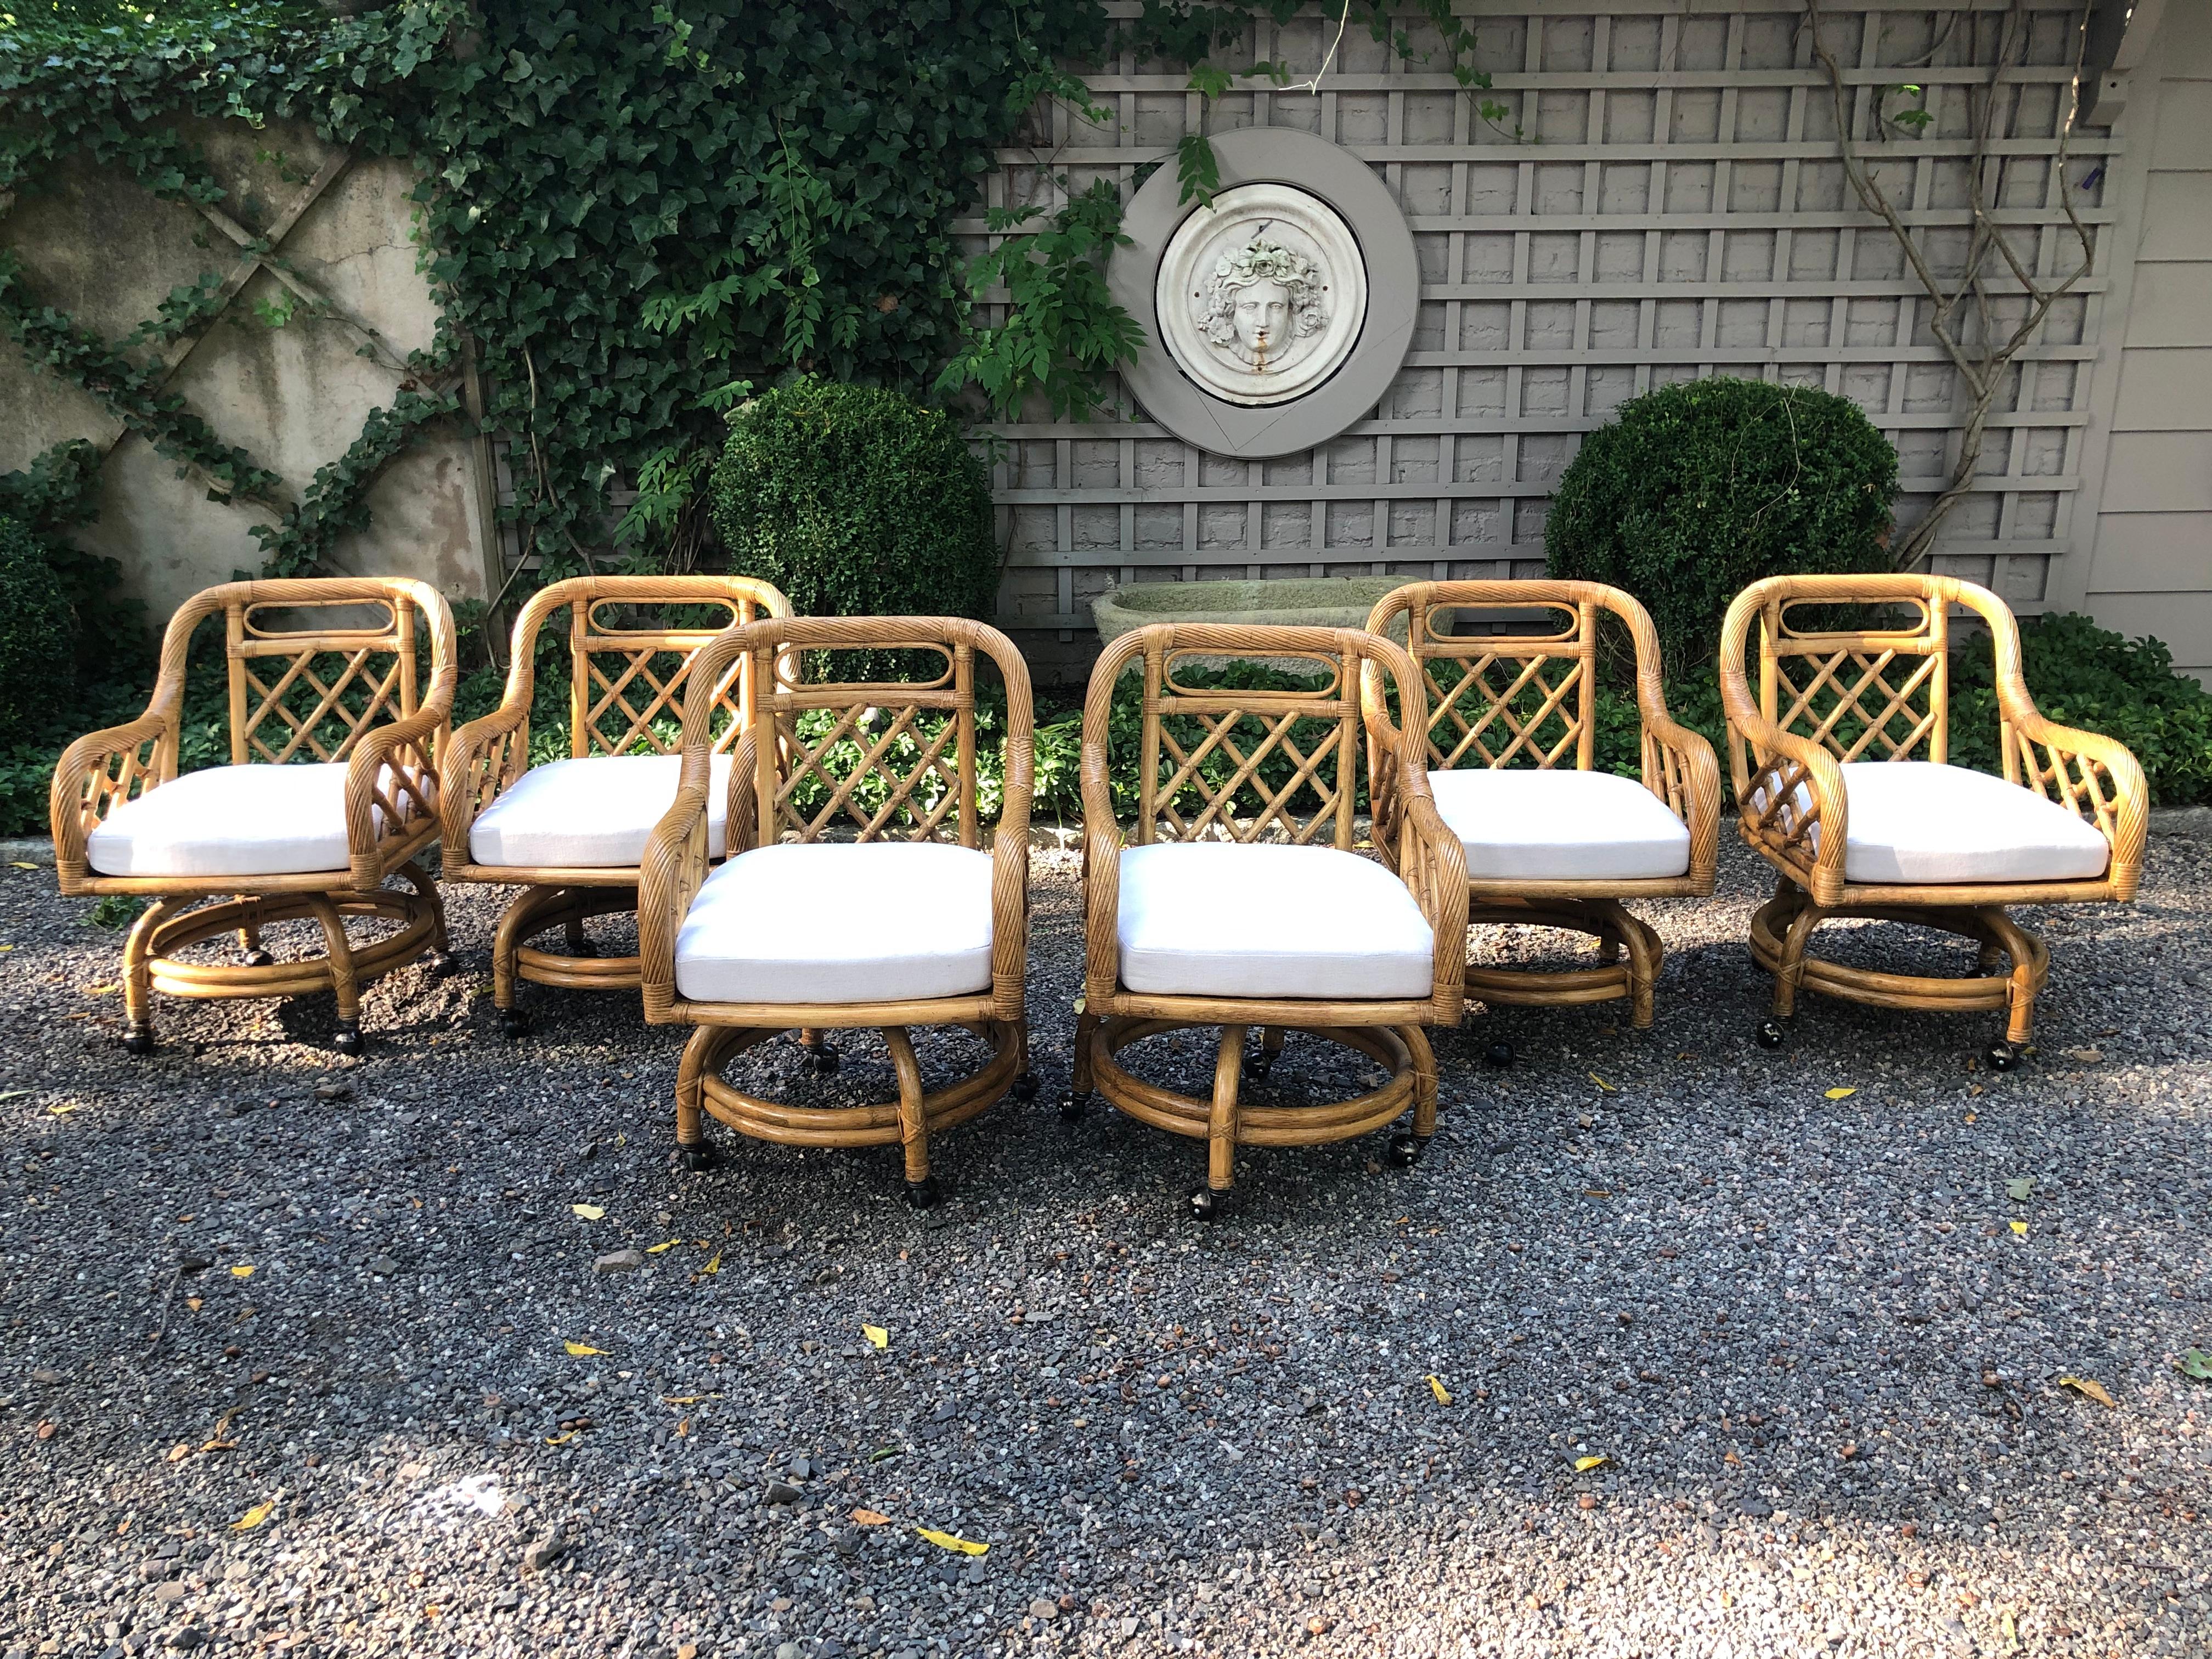 Fabulous set of six Mid-Century Modern rattan swivel dining chairs in the style of Franco Albini. Each chair has an off white linen loose cushion. These chairs have a chunky appearance and are quite substantial.
Measures: Seat height 18.5”, arm